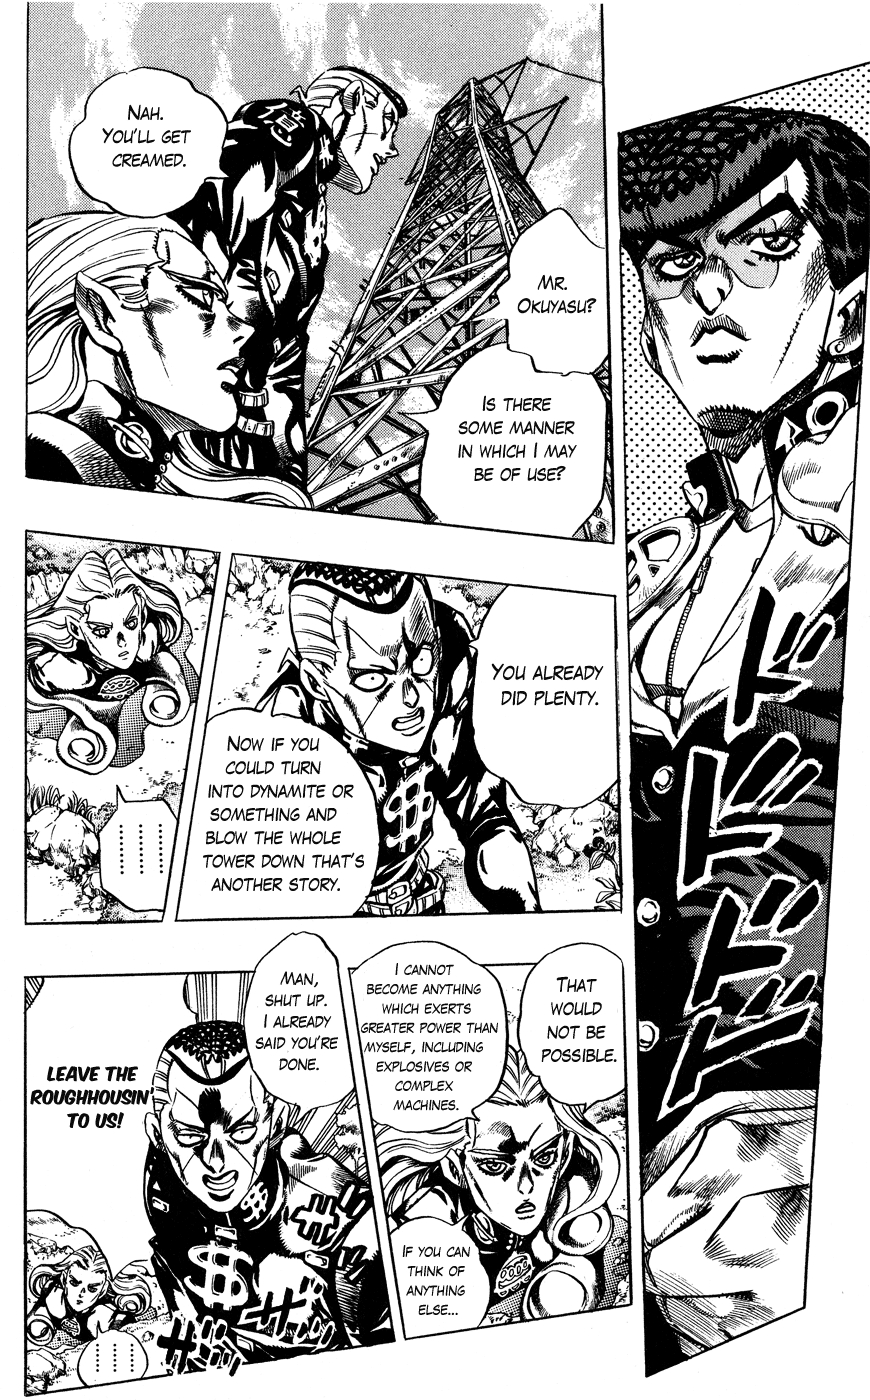 JoJo's Bizarre Adventure Part 4 Diamond is Unbreakable Vol. 15 Ch. 135 Who Wants to Live on a Transmission Tower? Part 3